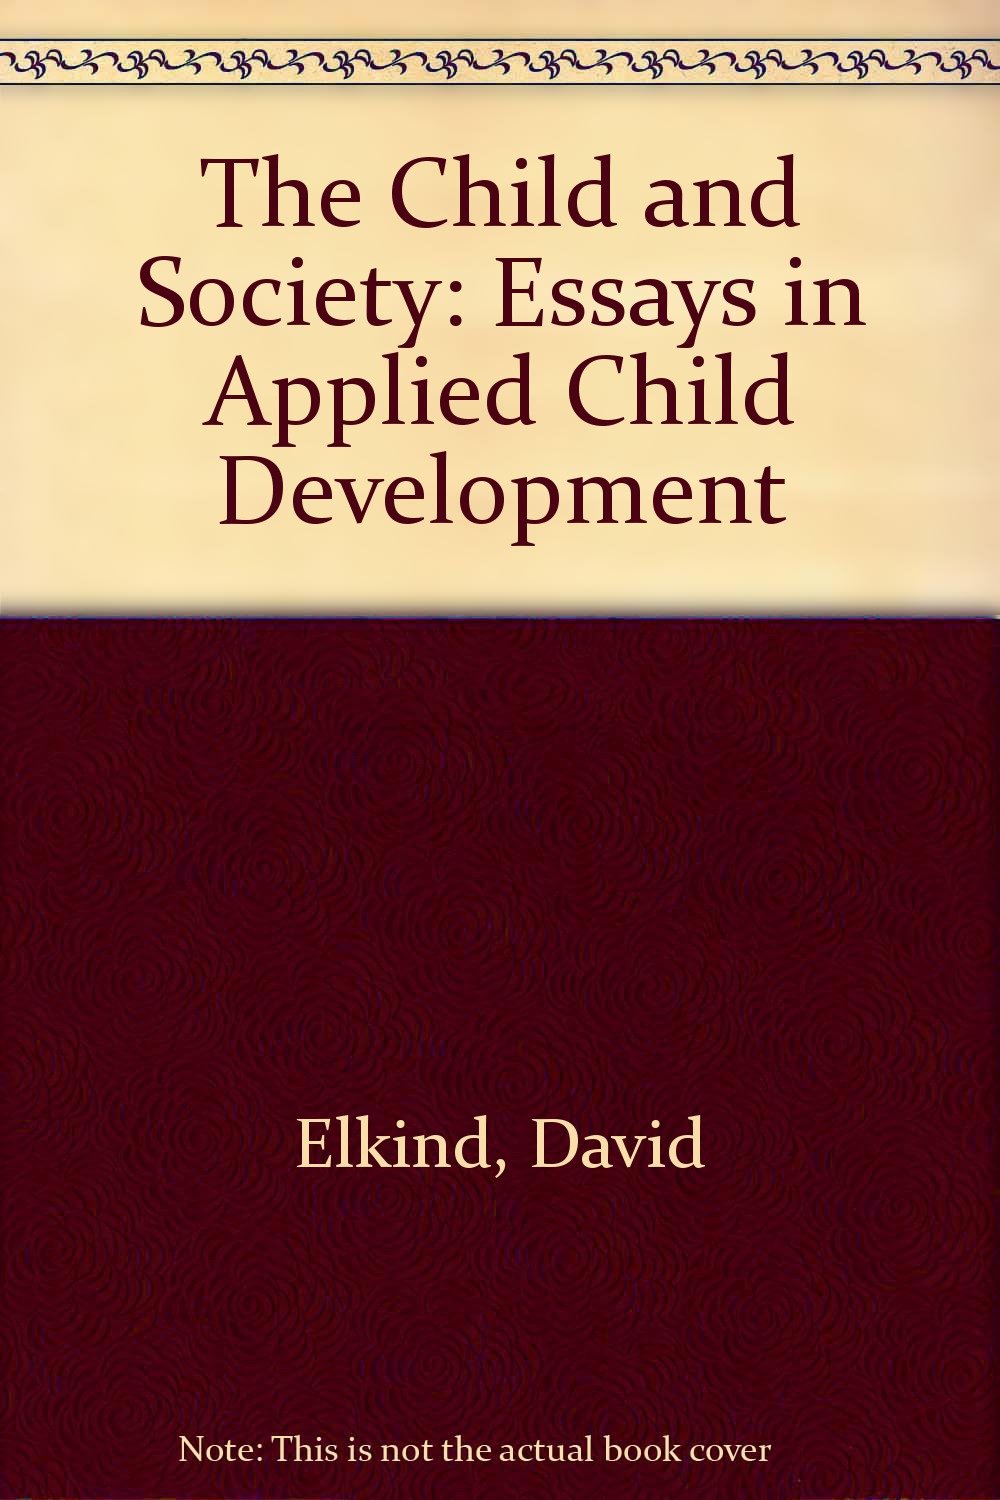 The Child and Society: Essays in Applied Child Development